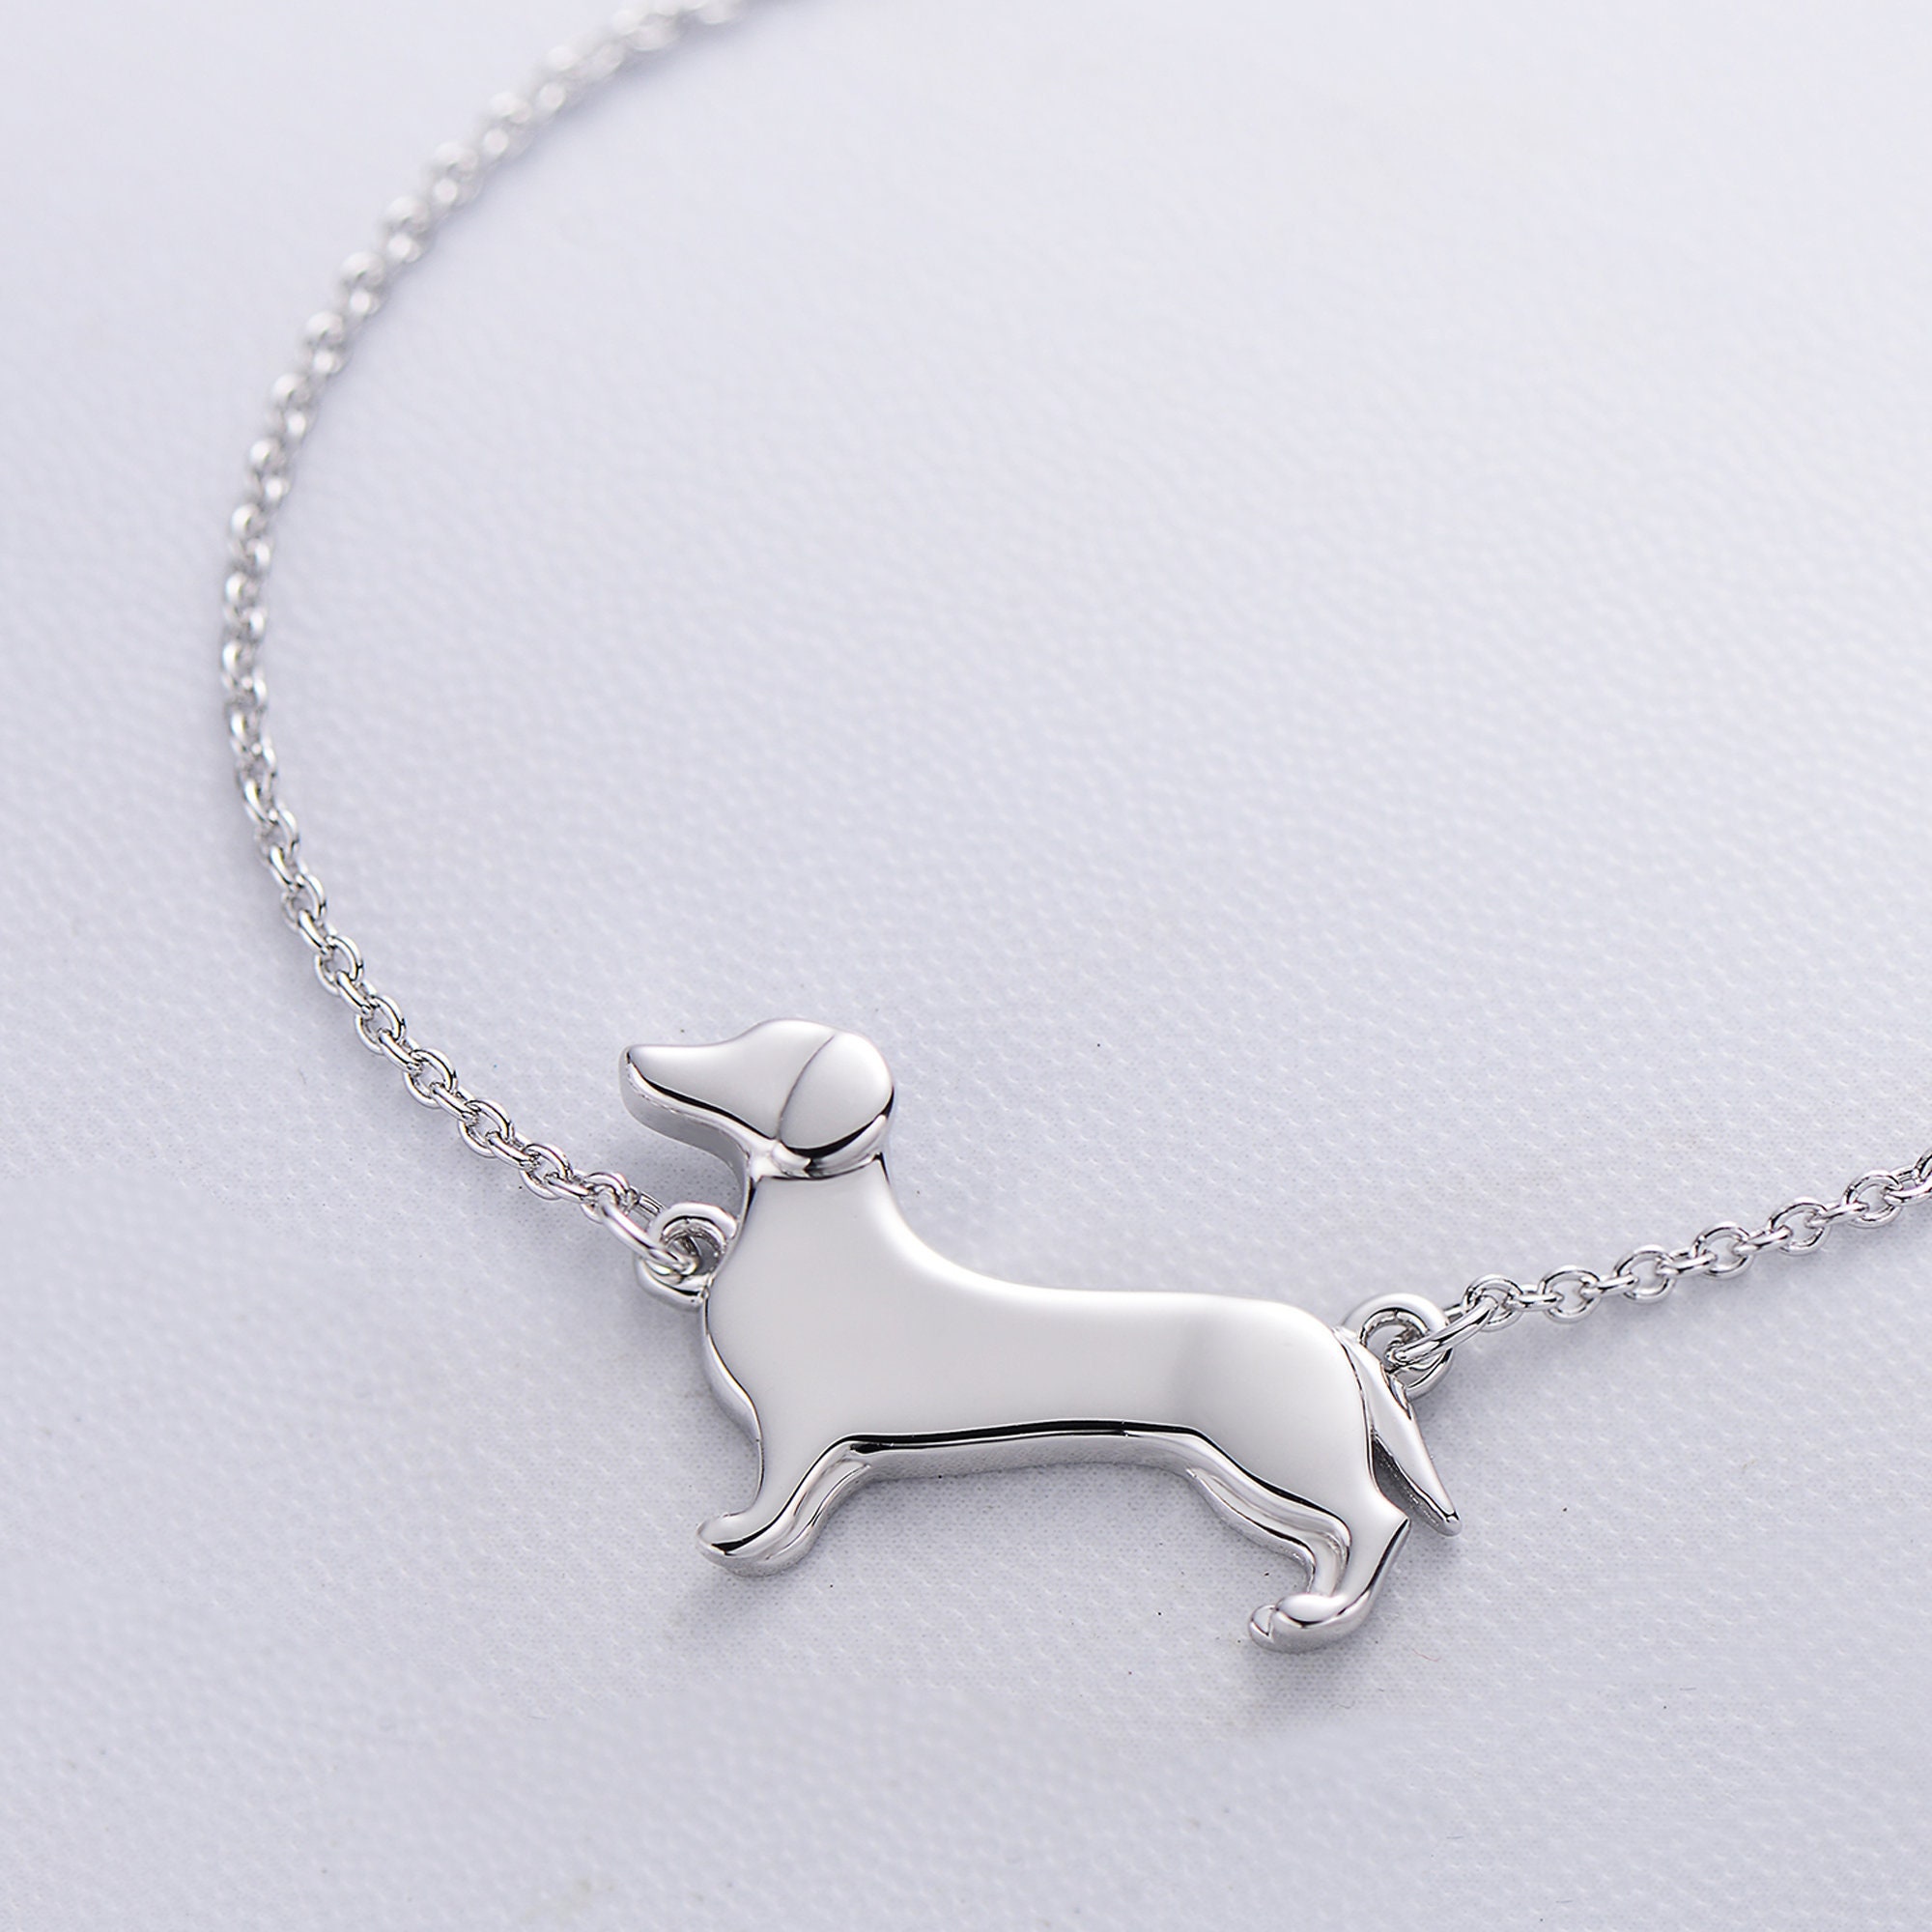 Wiener Dog Necklace | Vintage Inspired Pink or Clear – The Smoothe Store